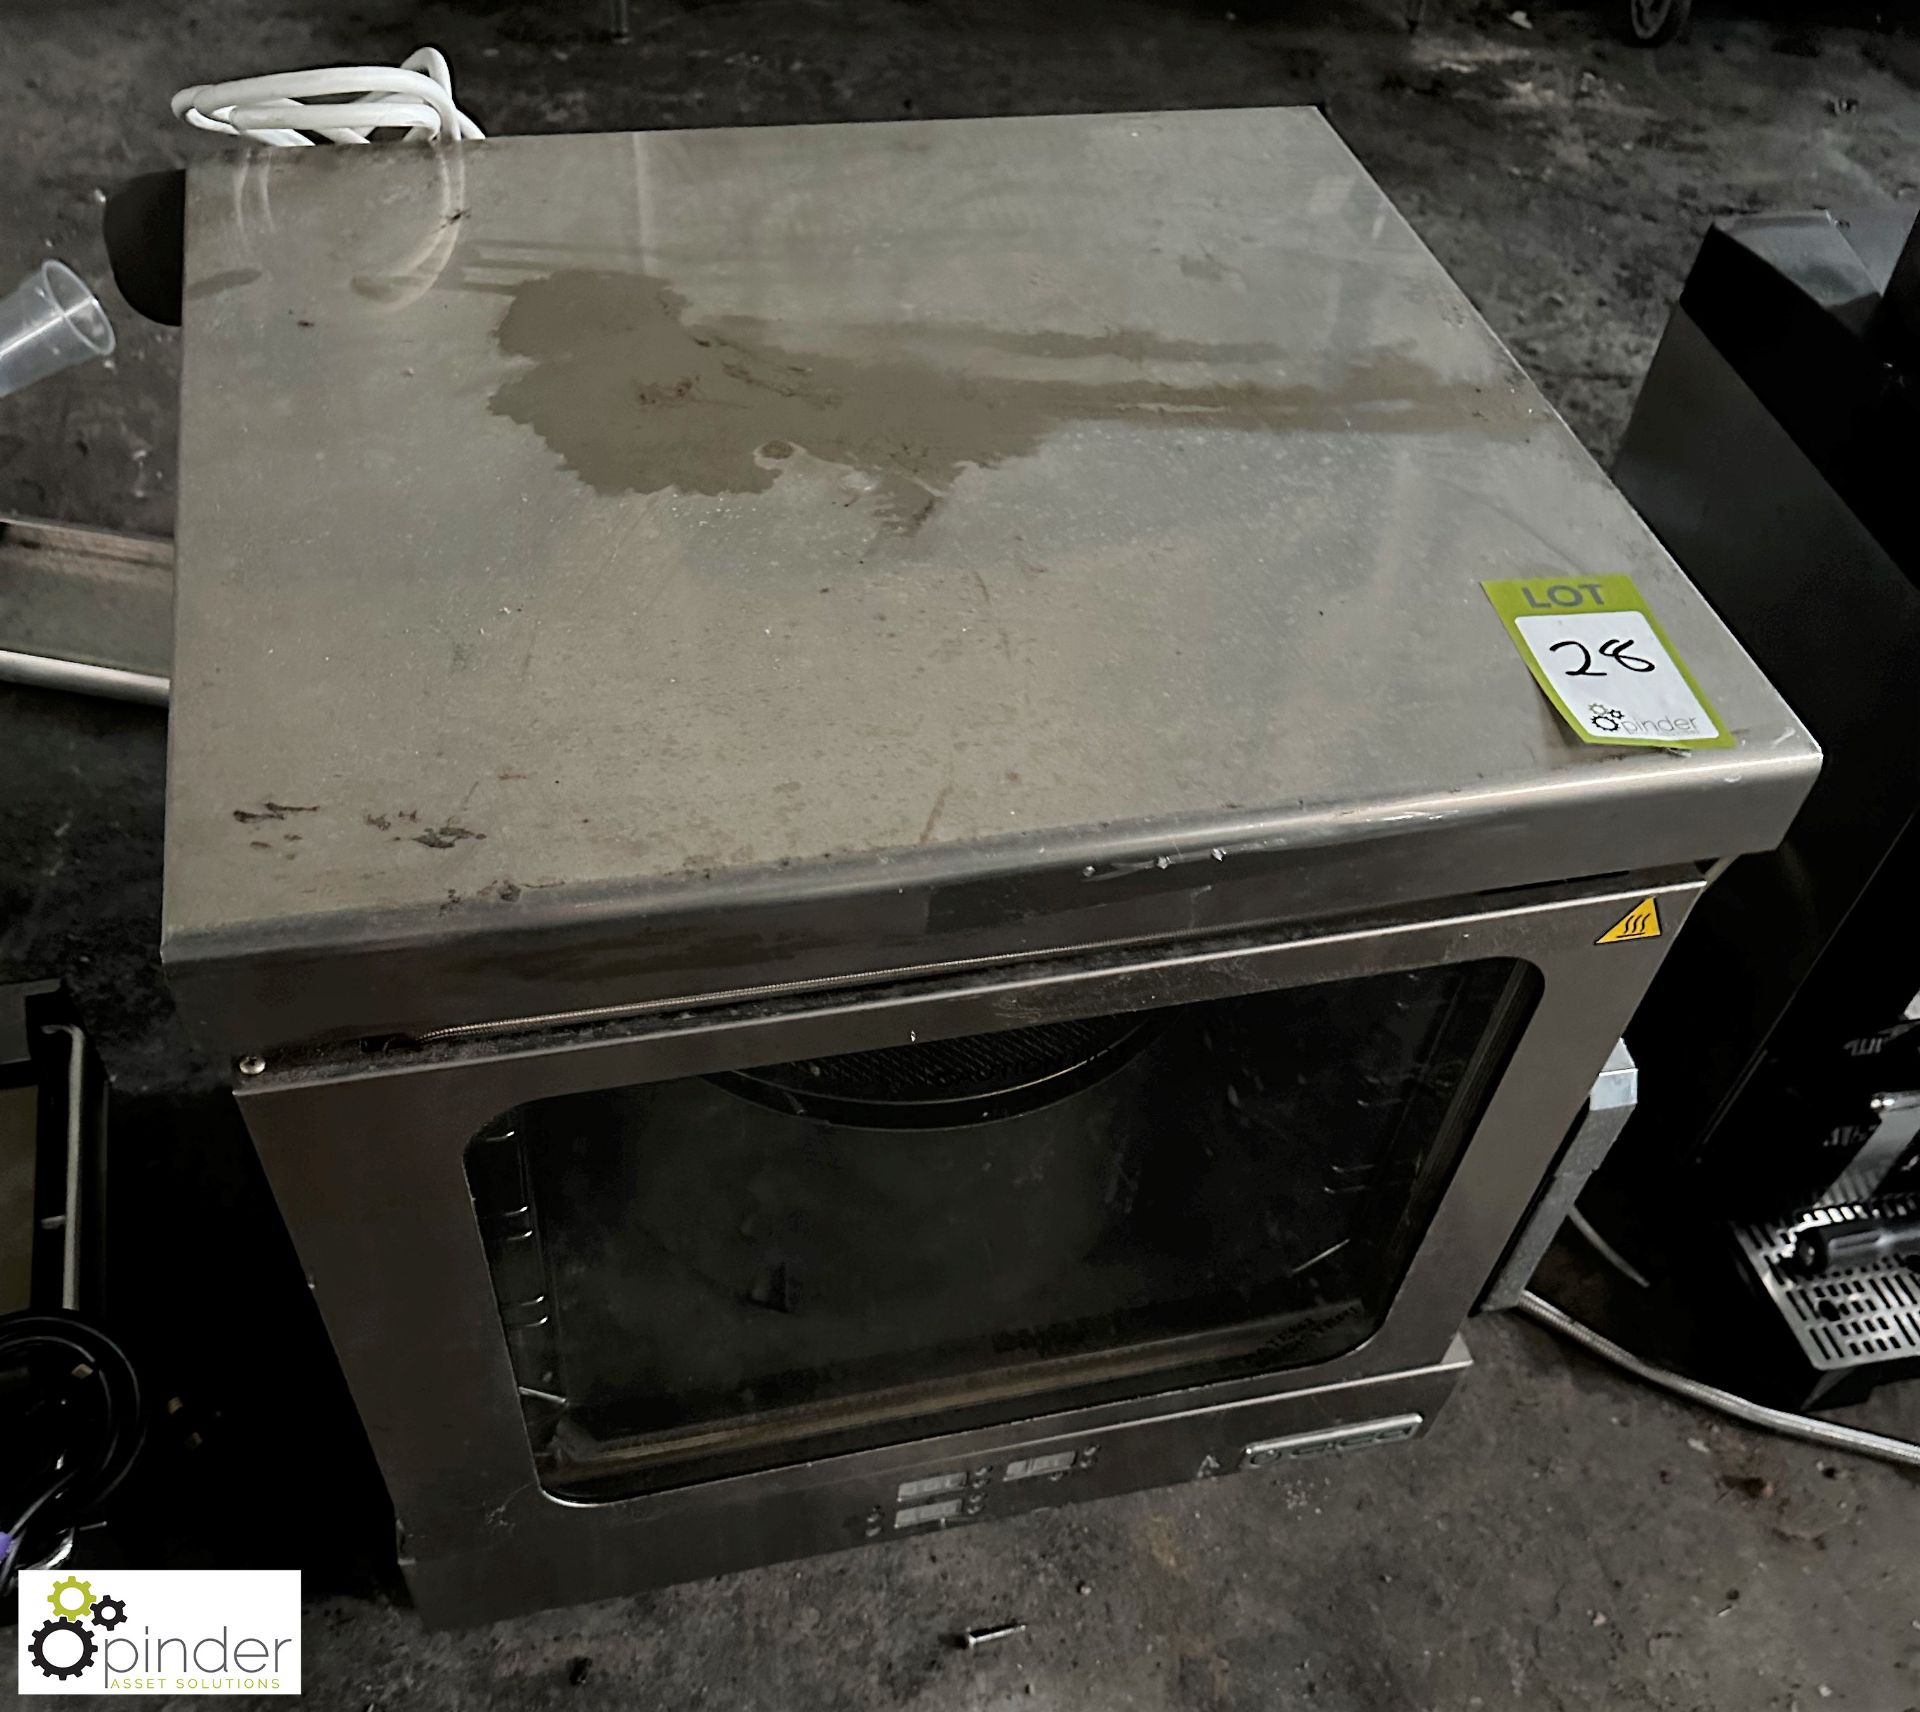 Cica stainless steel 3-tray Oven, 240volts - Image 3 of 5